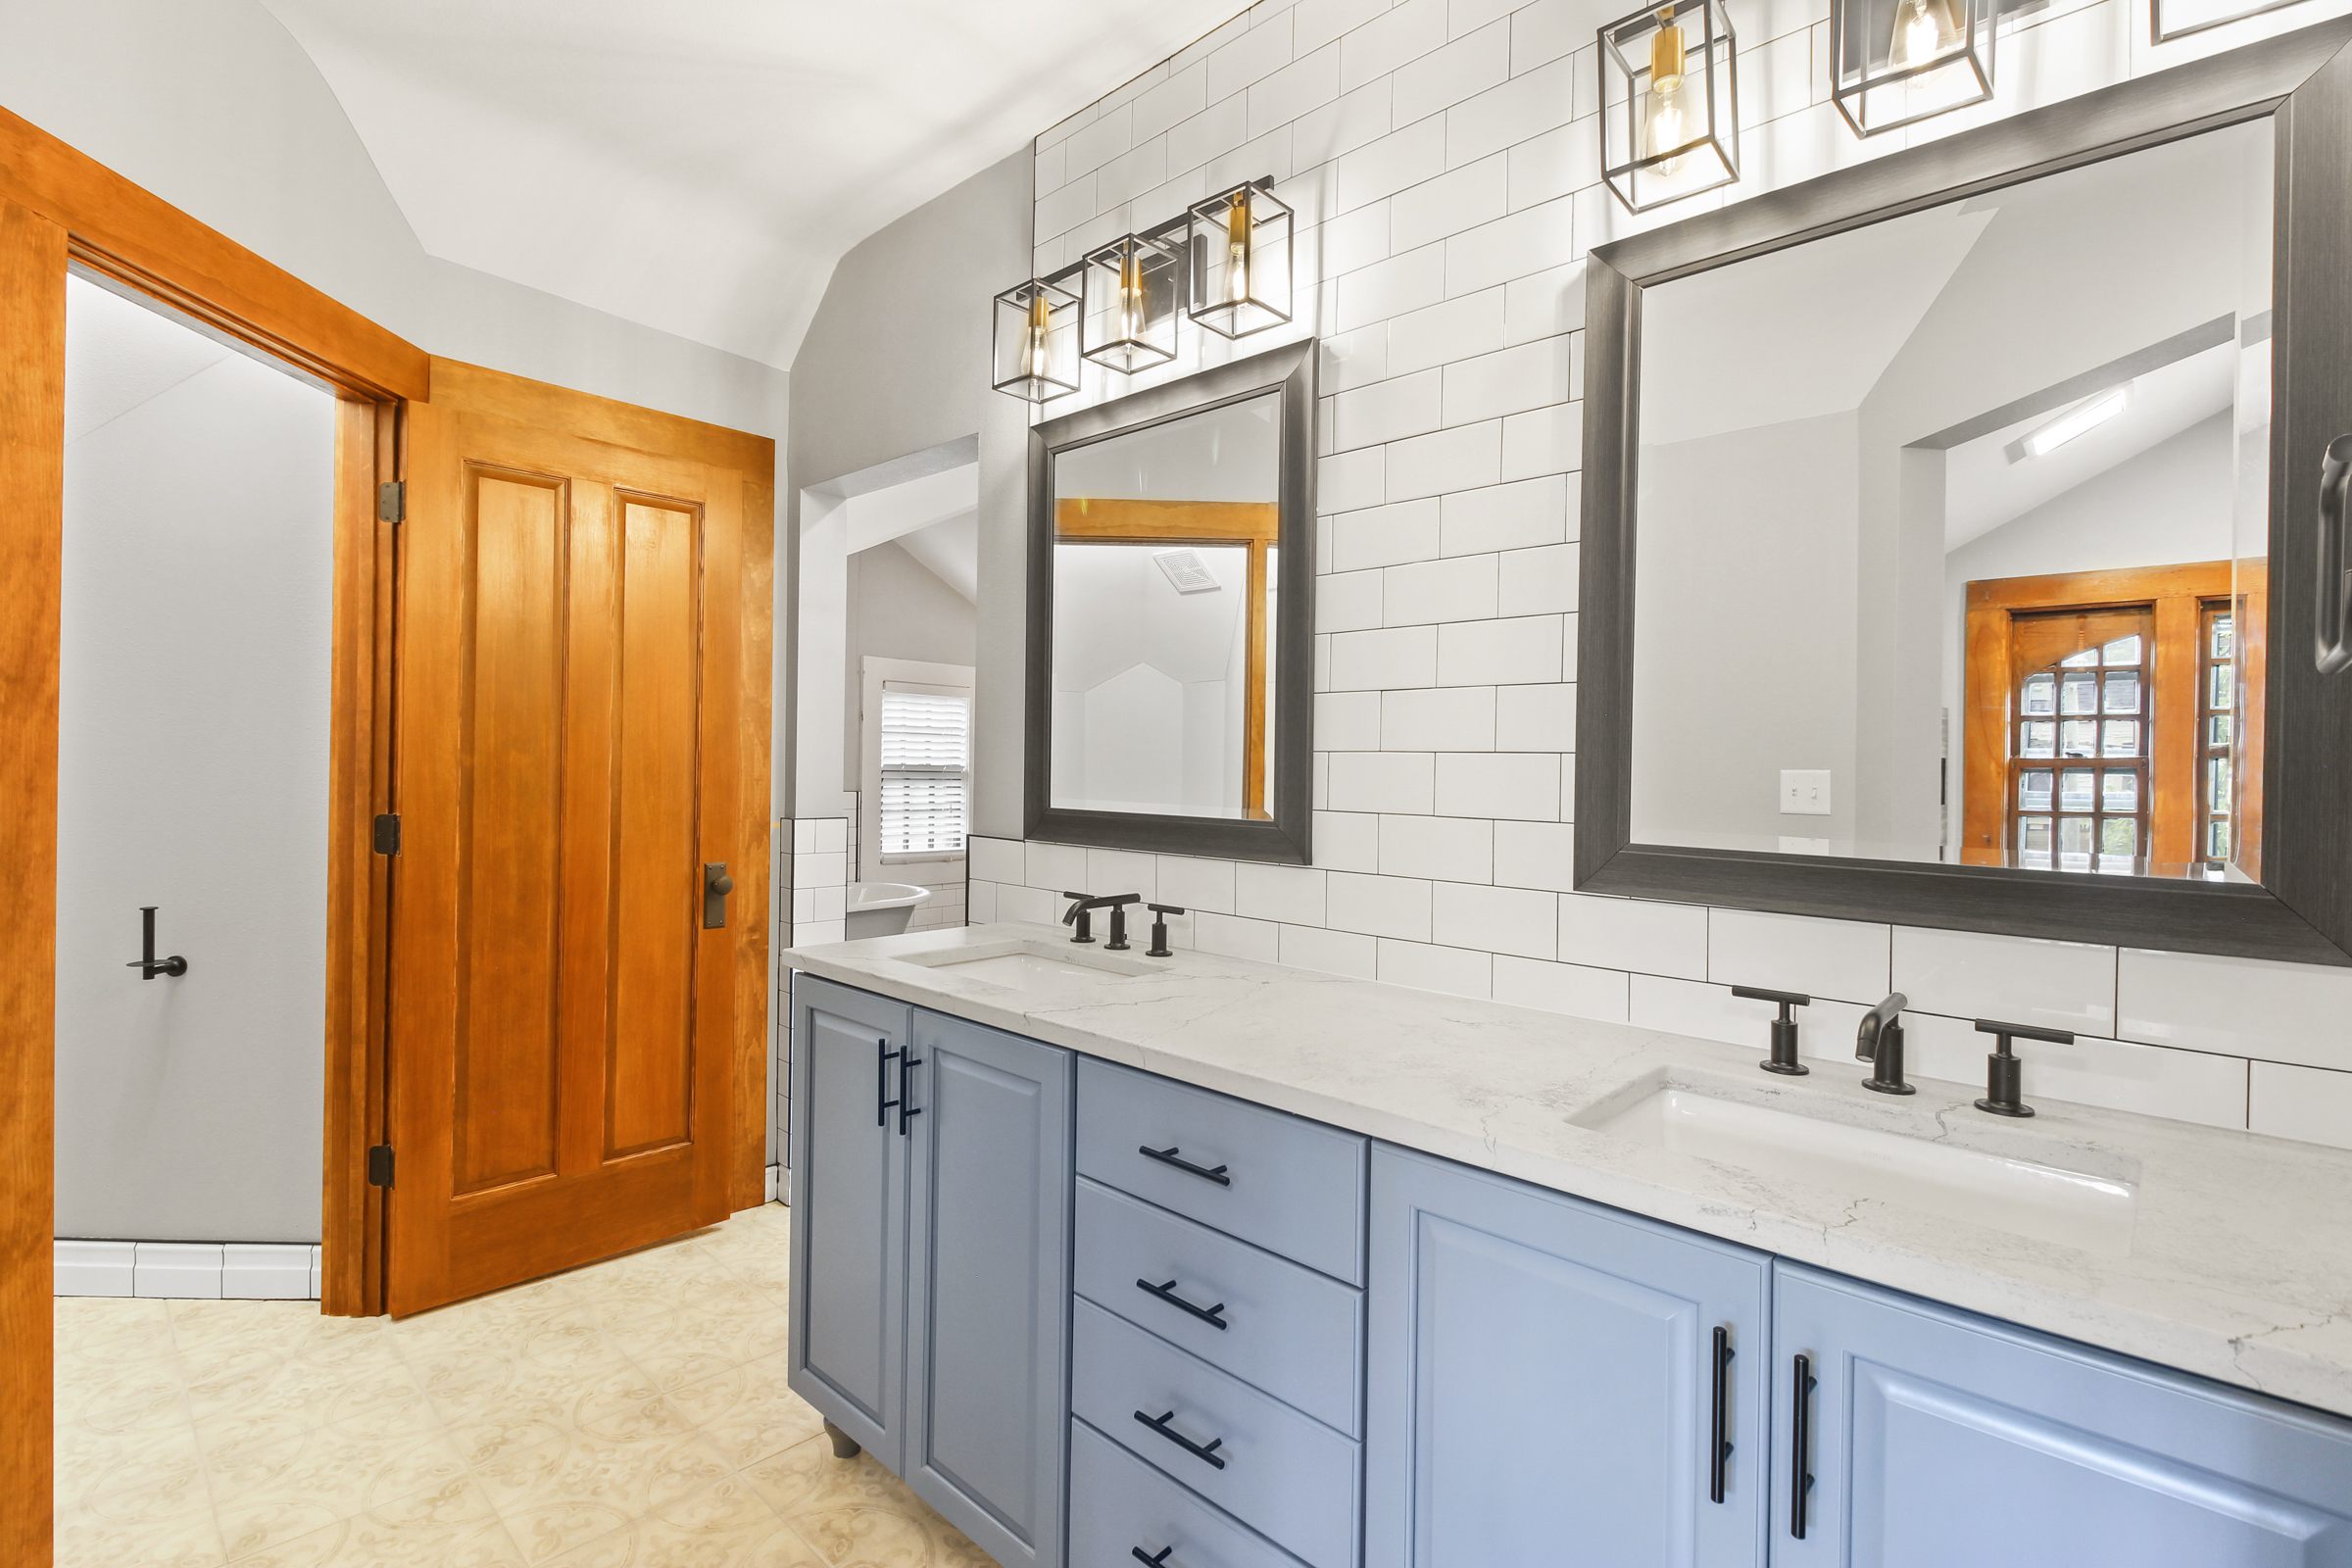 10 Do's and Don'ts of Bathroom Remodeling